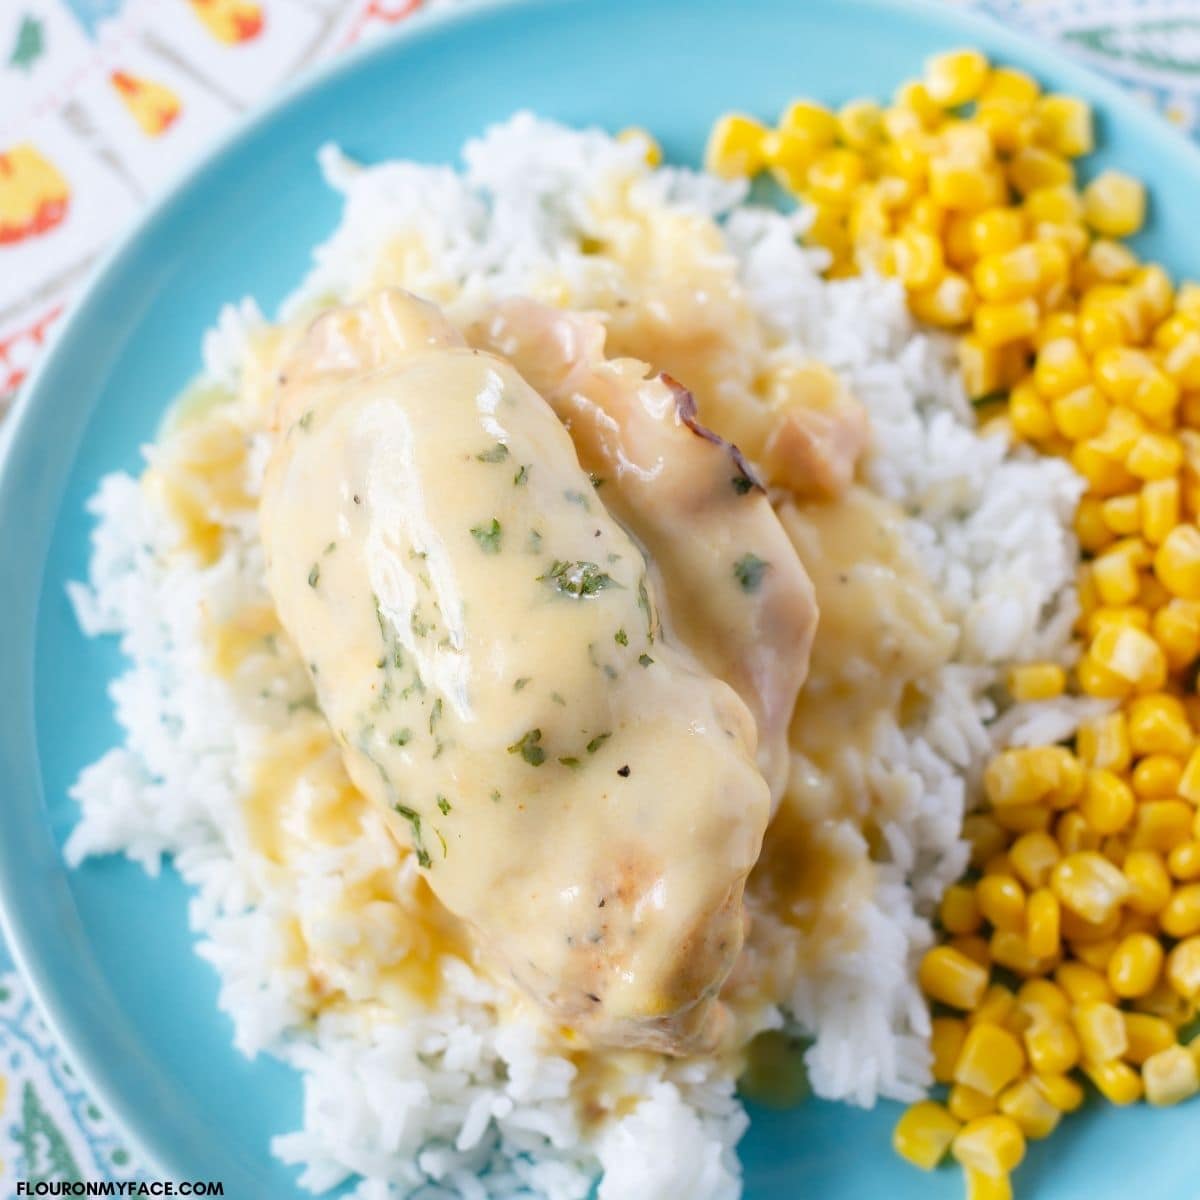 A boneless chicken breast smothered in white gravy on a bed of white rice.